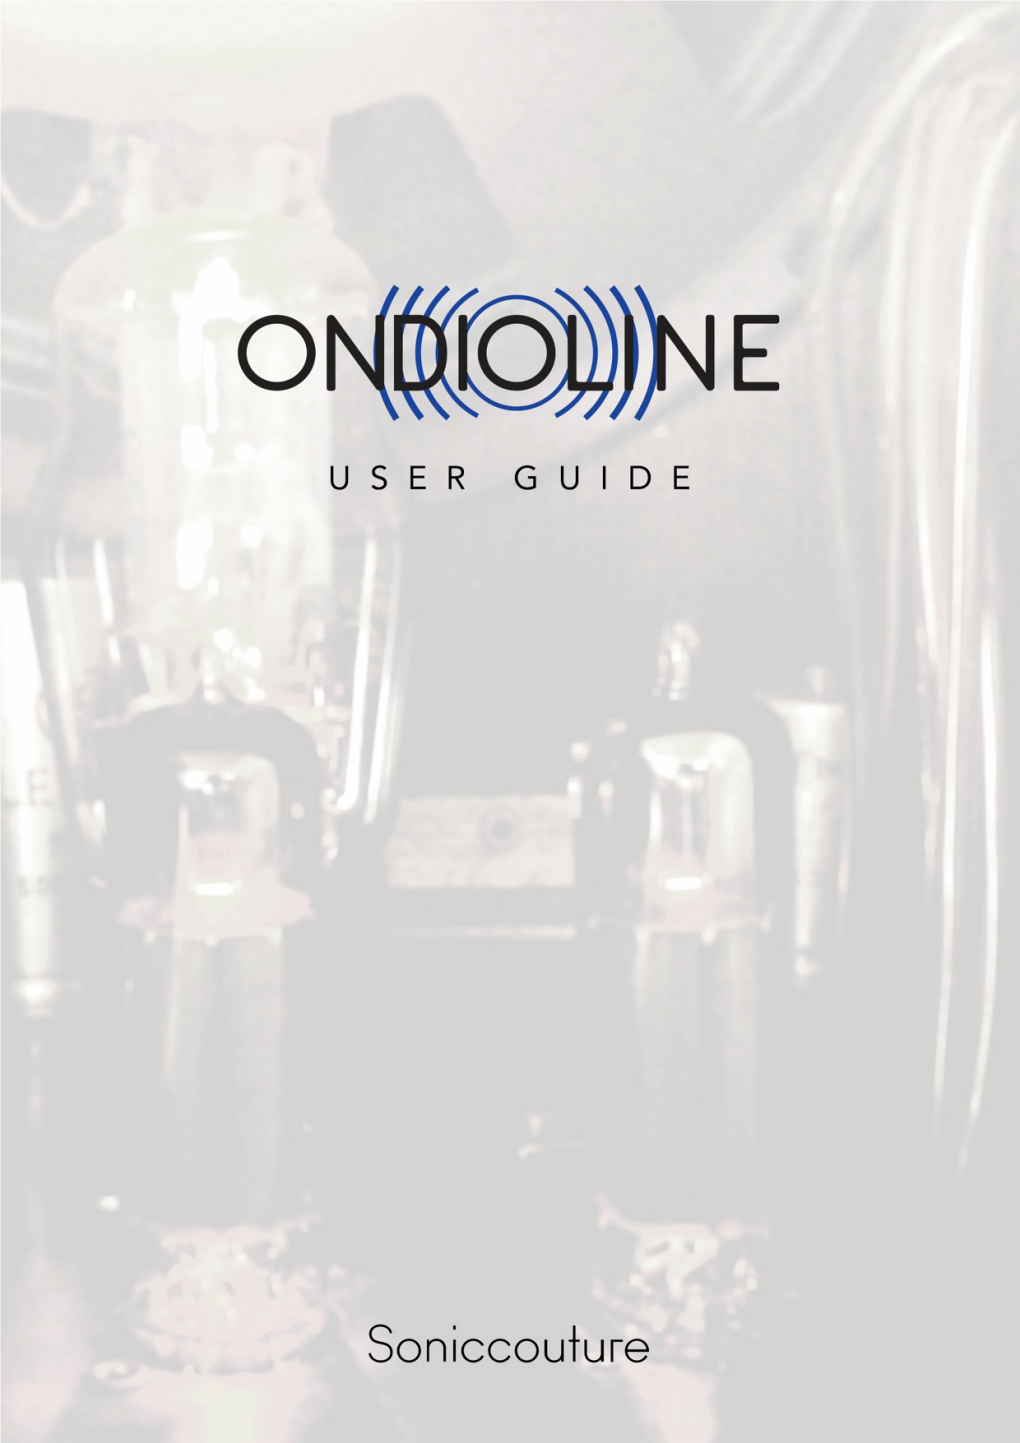 Ondioline User Guide.Pages